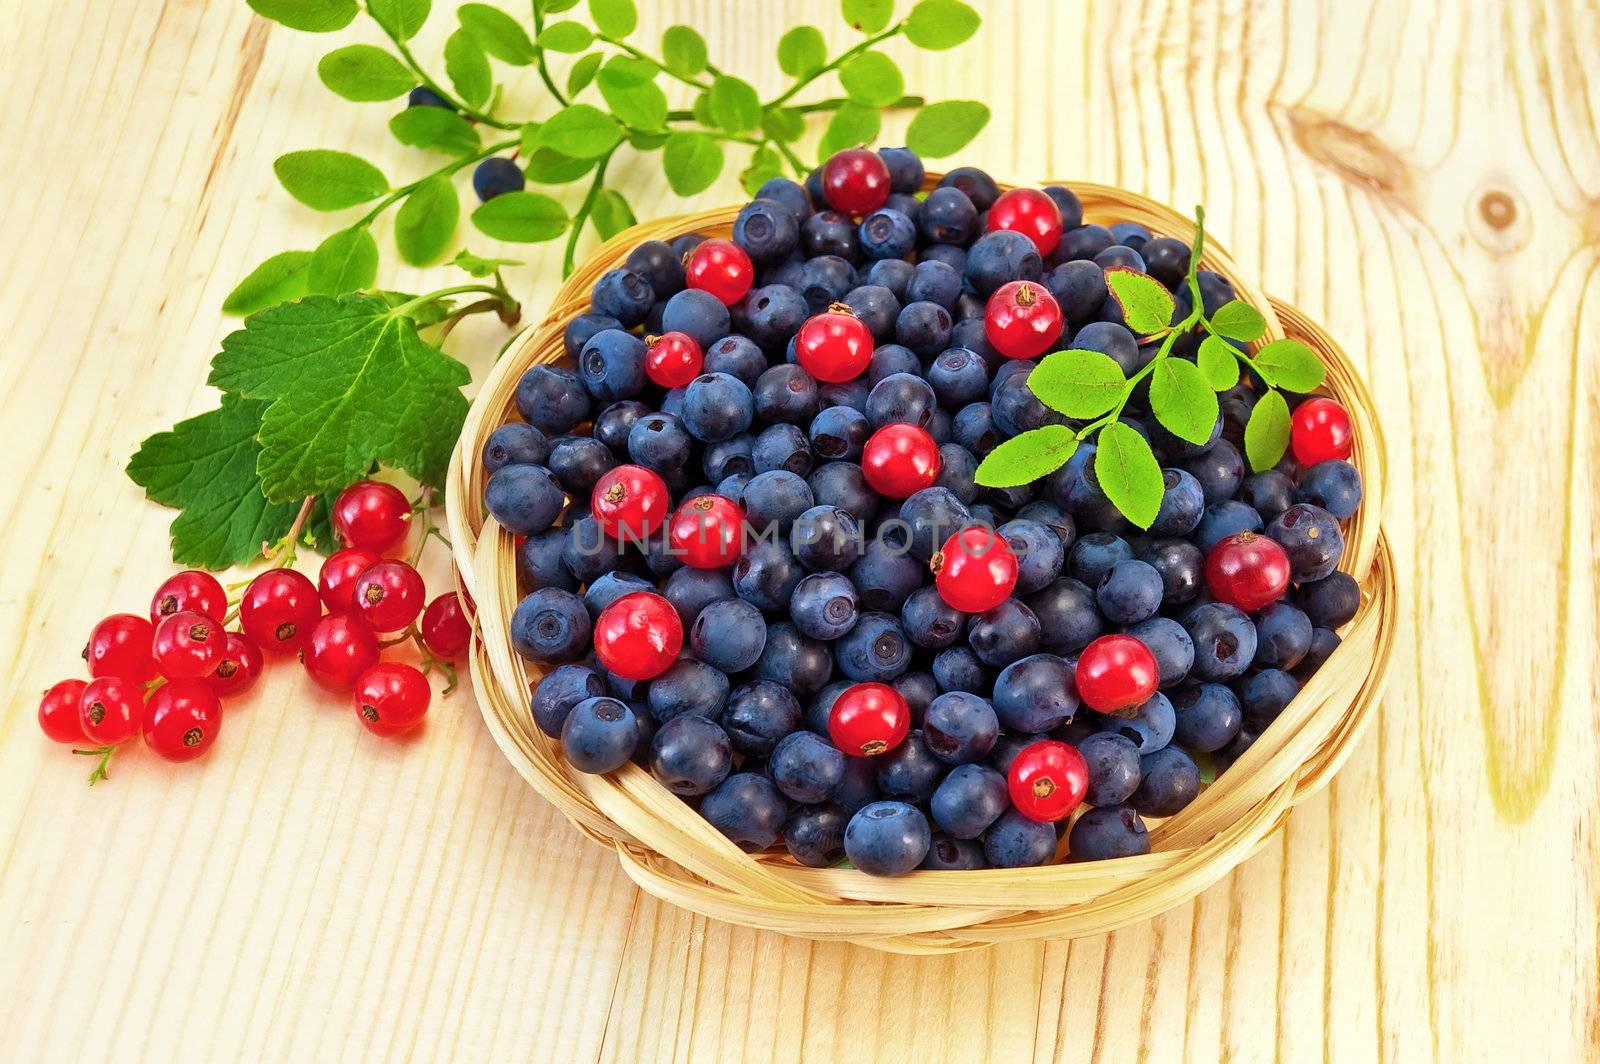 Blueberries with red currants on the board by rezkrr